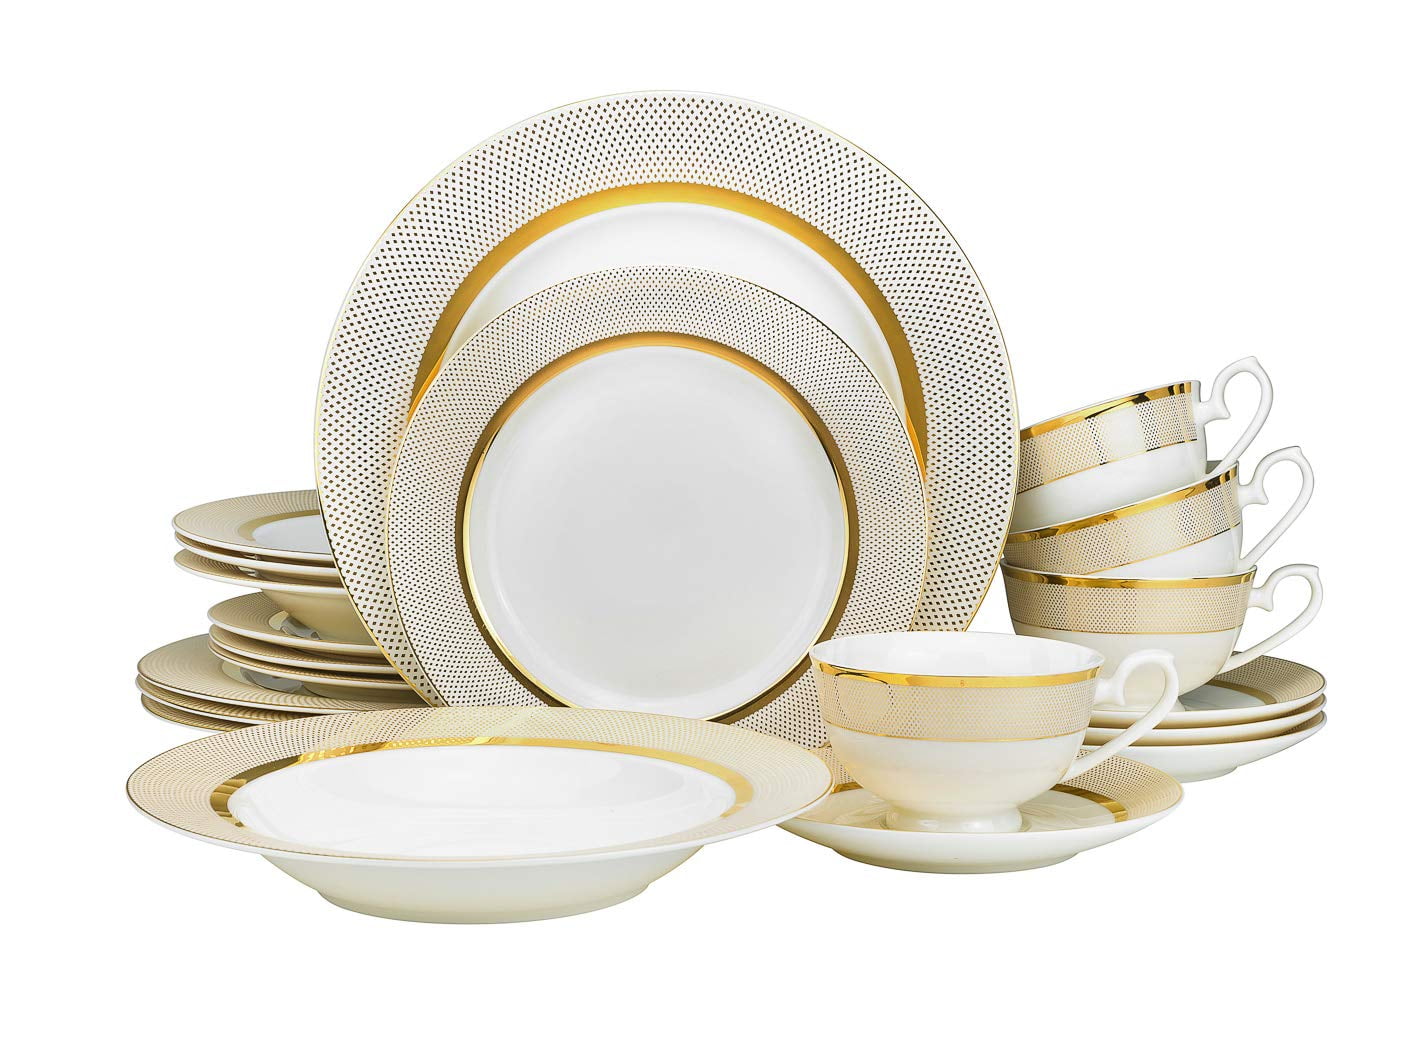 Dinner Plate Luxurious Dinner Set for Party or Wedding Gifts, Modern  Luxurious Dinnerware Sets 48 Pc…See more Dinner Plate Luxurious Dinner Set  for